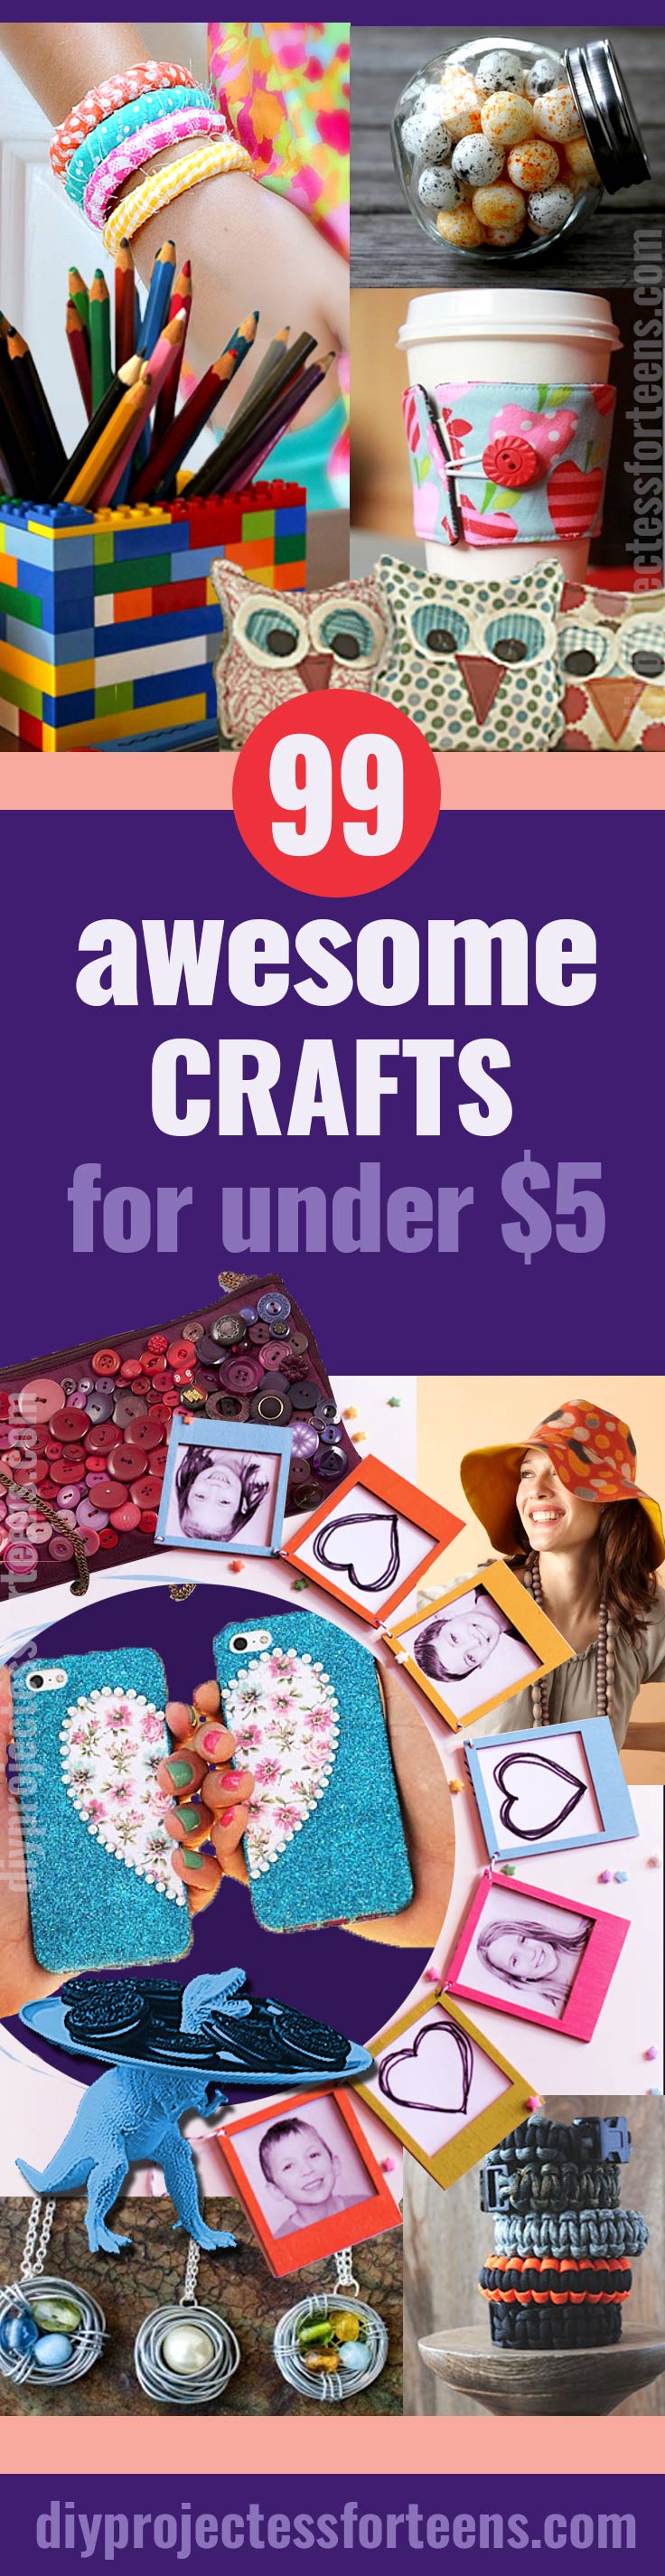 Cheap Crafts You Can Make for Less Than $5. Cool and Cheap DIY Project Ideas for Teens, Tweens, Teenager Girls and Adults. Fun Decor, Gifts, Accessories, Fashion and Photo Ideas